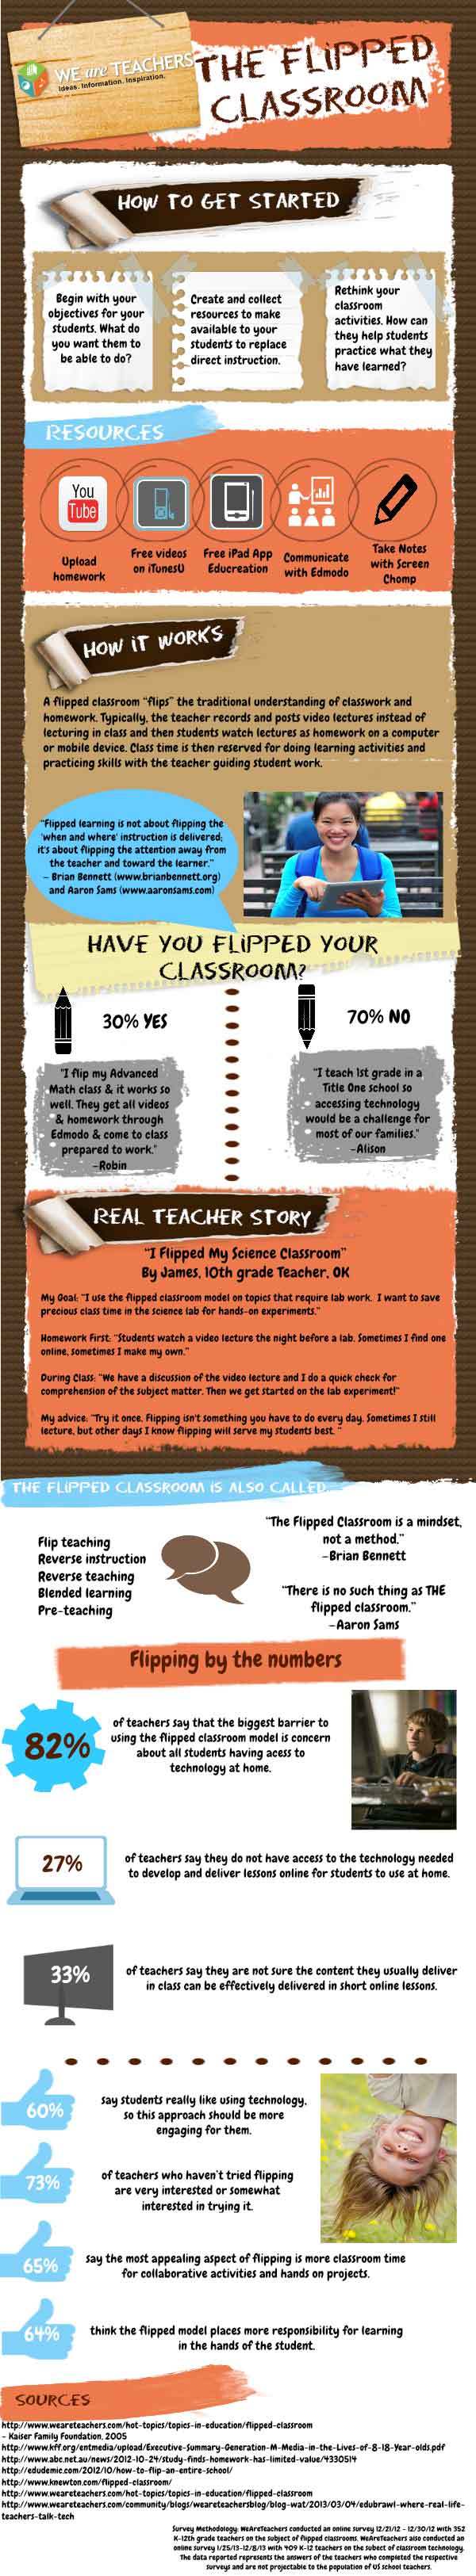 Flipping-the-Classroom-Infographic